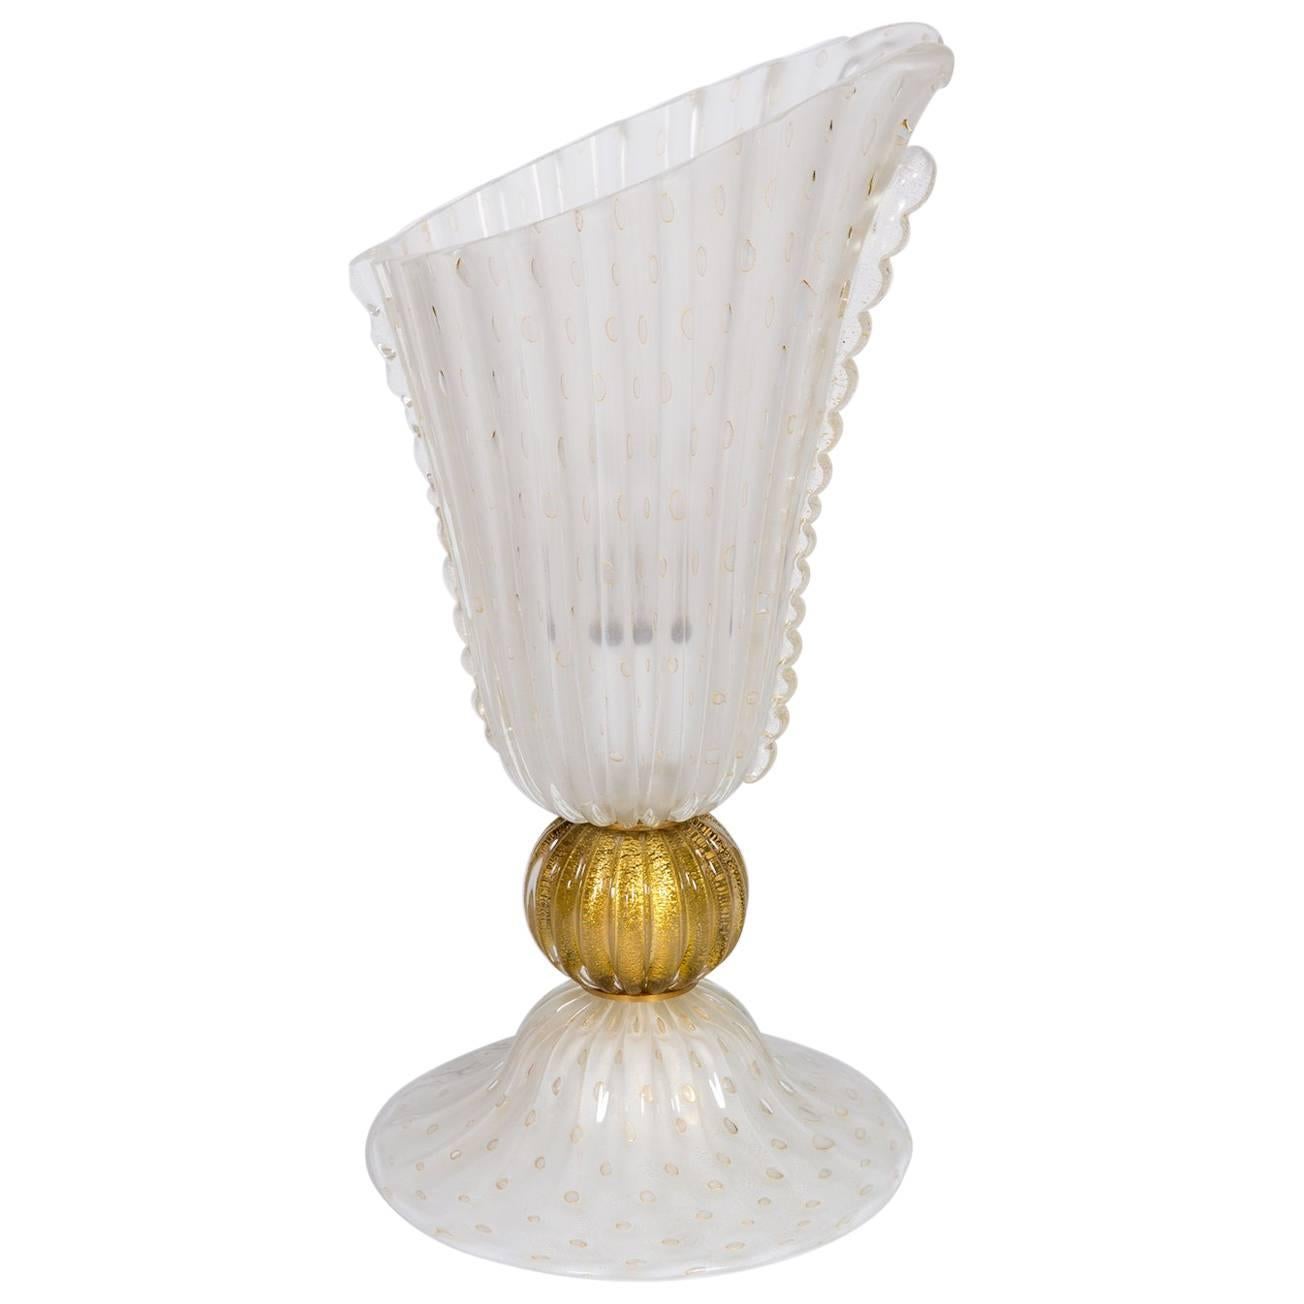 Italian Table Lamp in Blown Murano Glass, White and 24kt Gold Finishes, 1970s